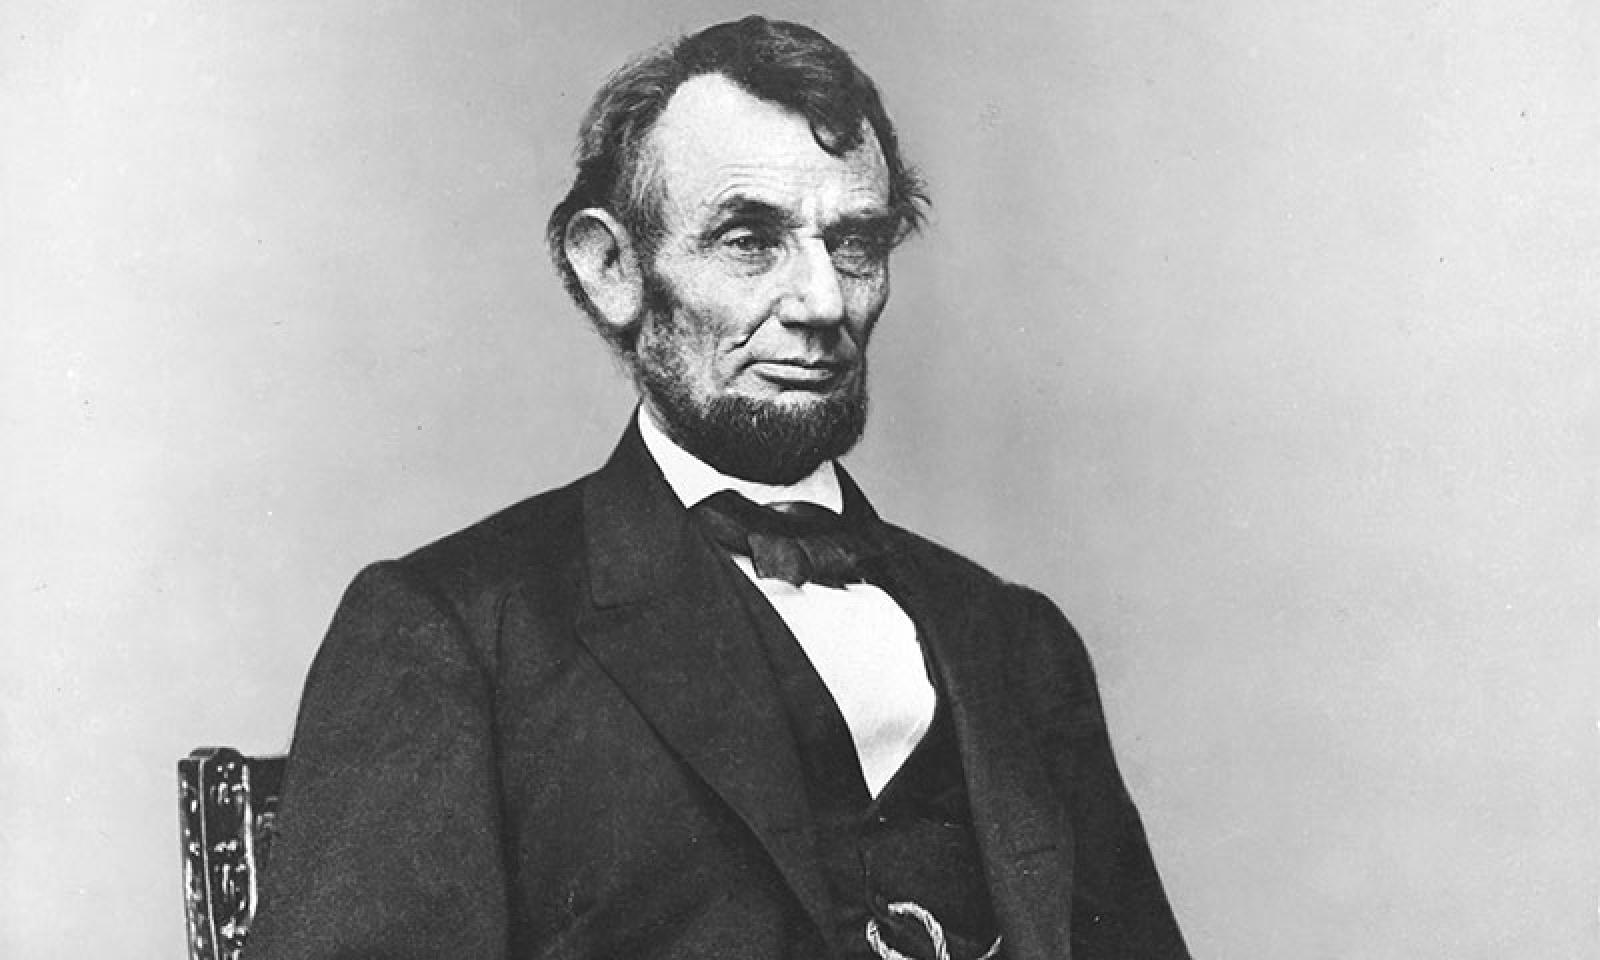 I’ll Be Impressed If You Score 13/18 on This General Knowledge Quiz (feat. Abraham Lincoln) Abraham Lincoln